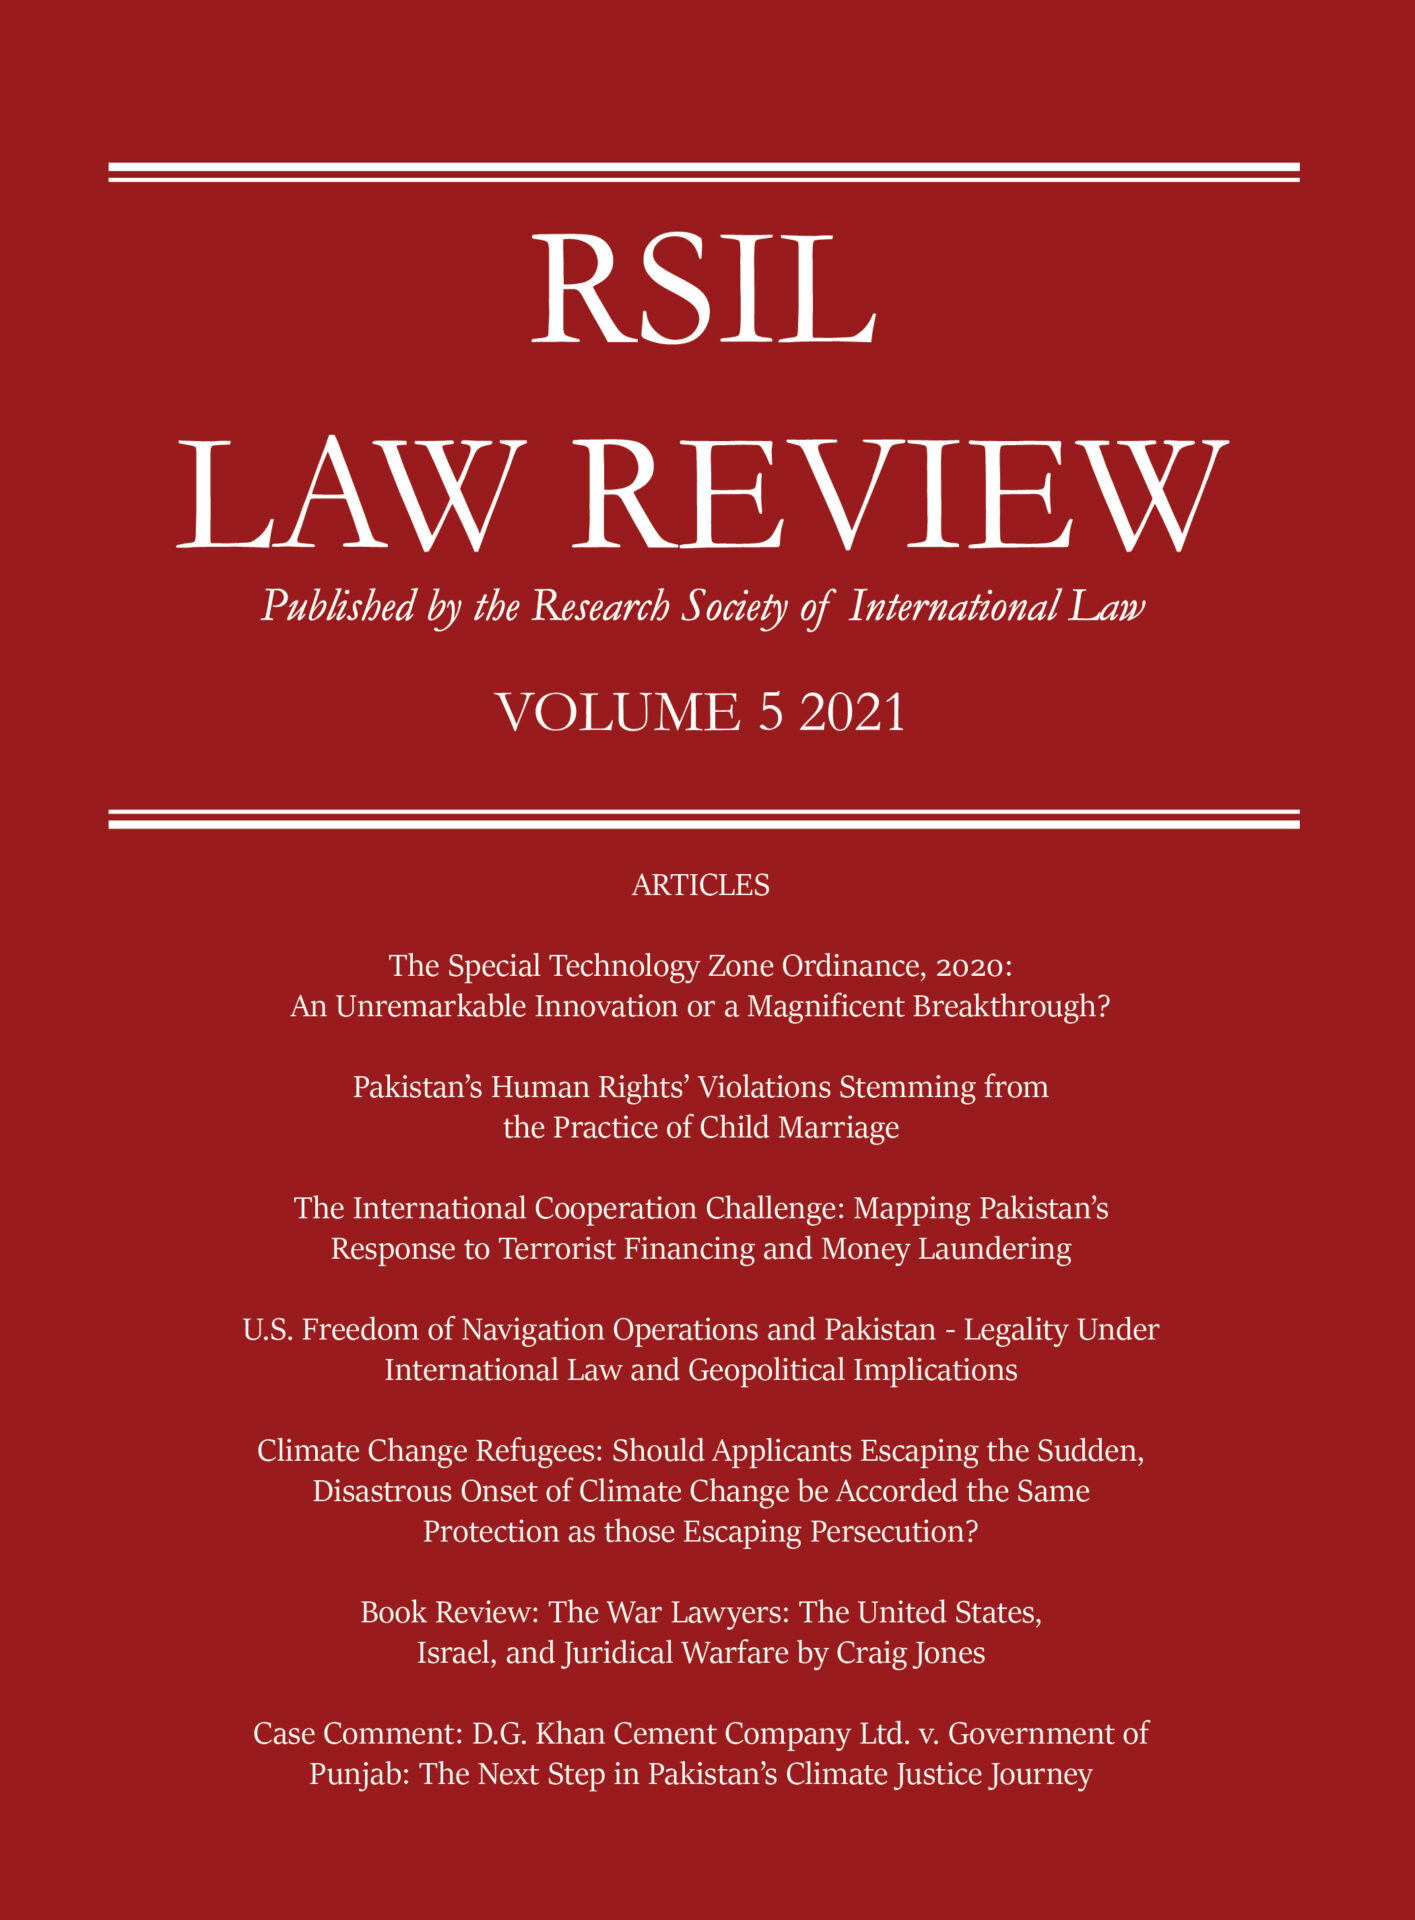 RSIL Law Review Vol. 5 2021